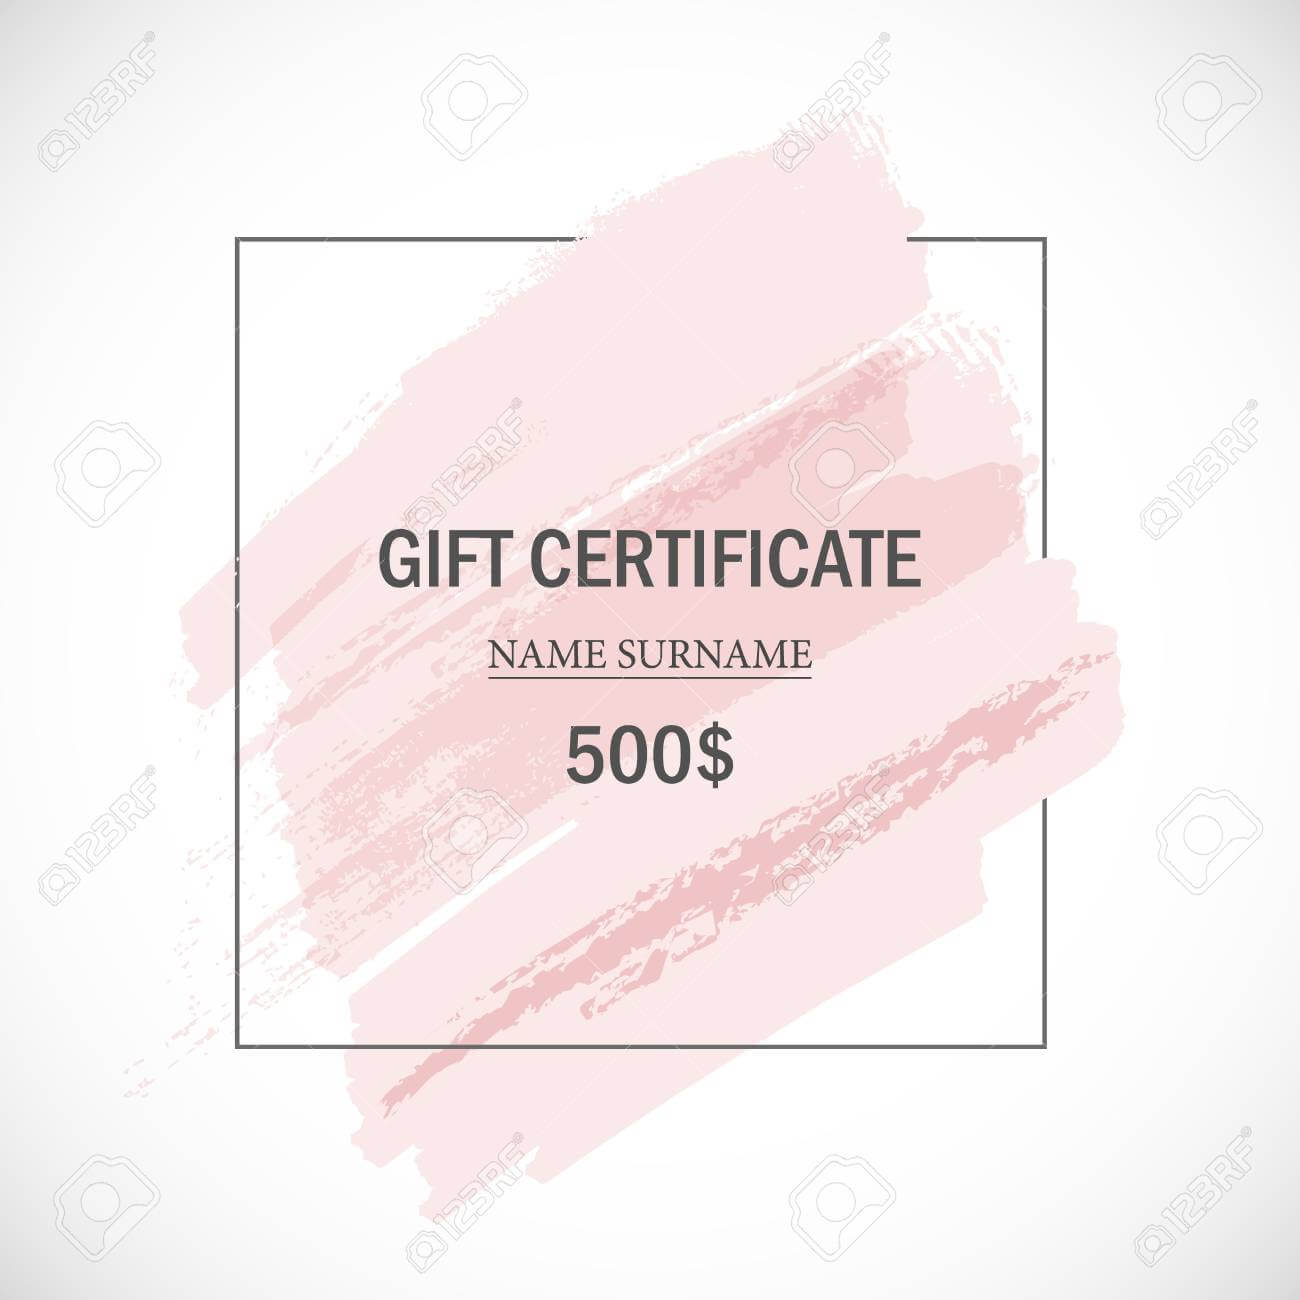 Pink Gift Certificate Template. For Pink Gift Certificate Template